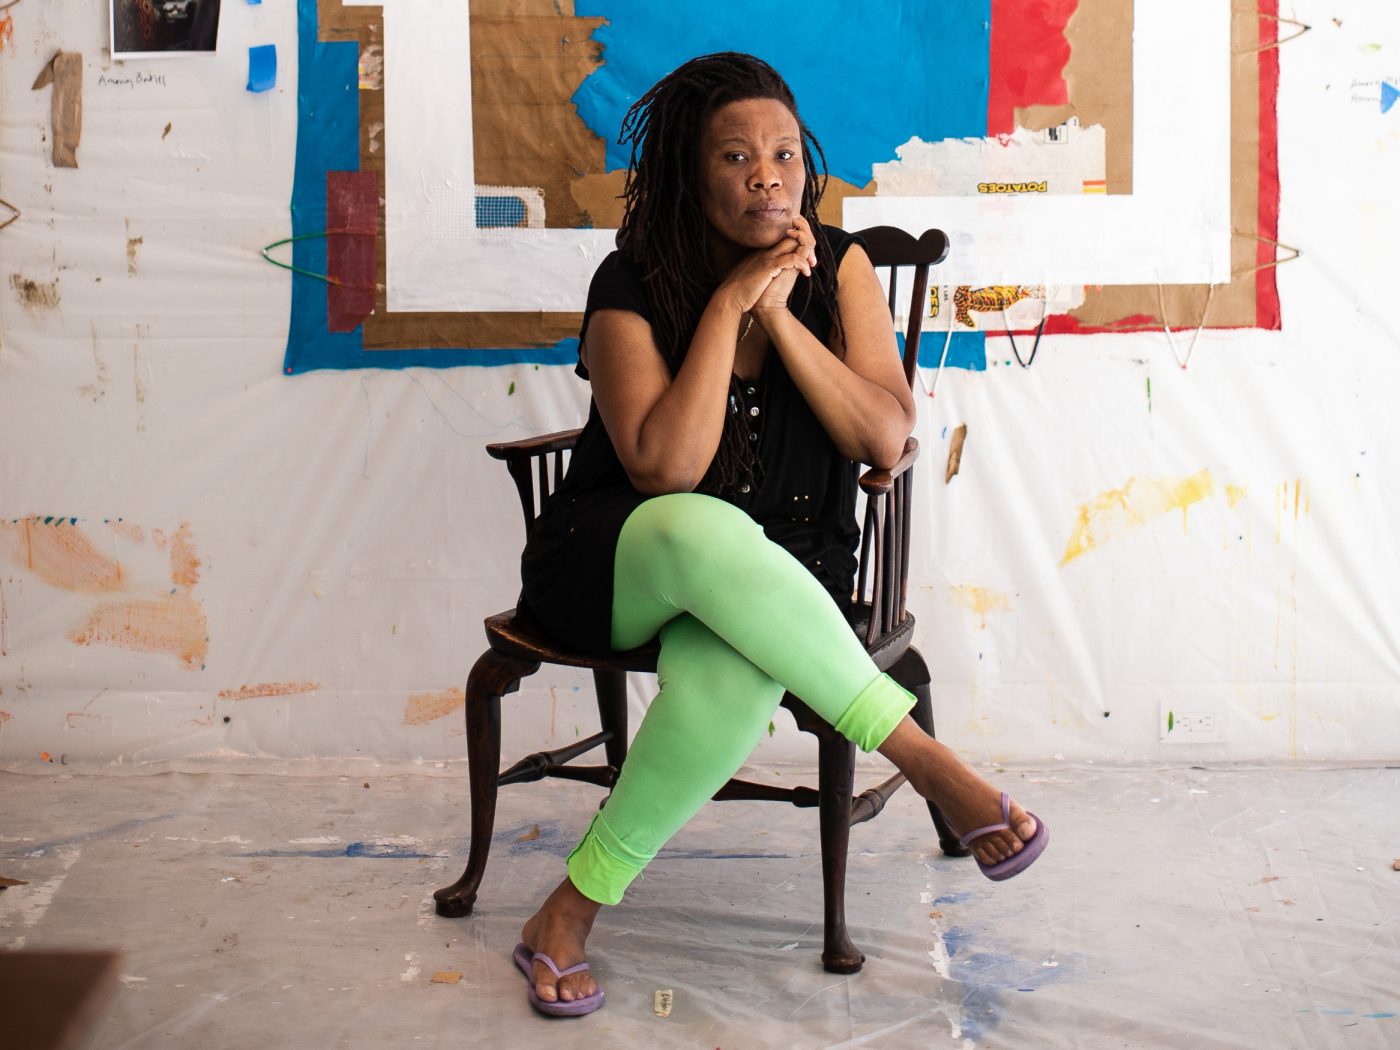 Tomashi Jackson in her studio at The Watermill Center, June 2021. Photo: Copyright Jessica Dalene, courtesy of The Watermill Center.